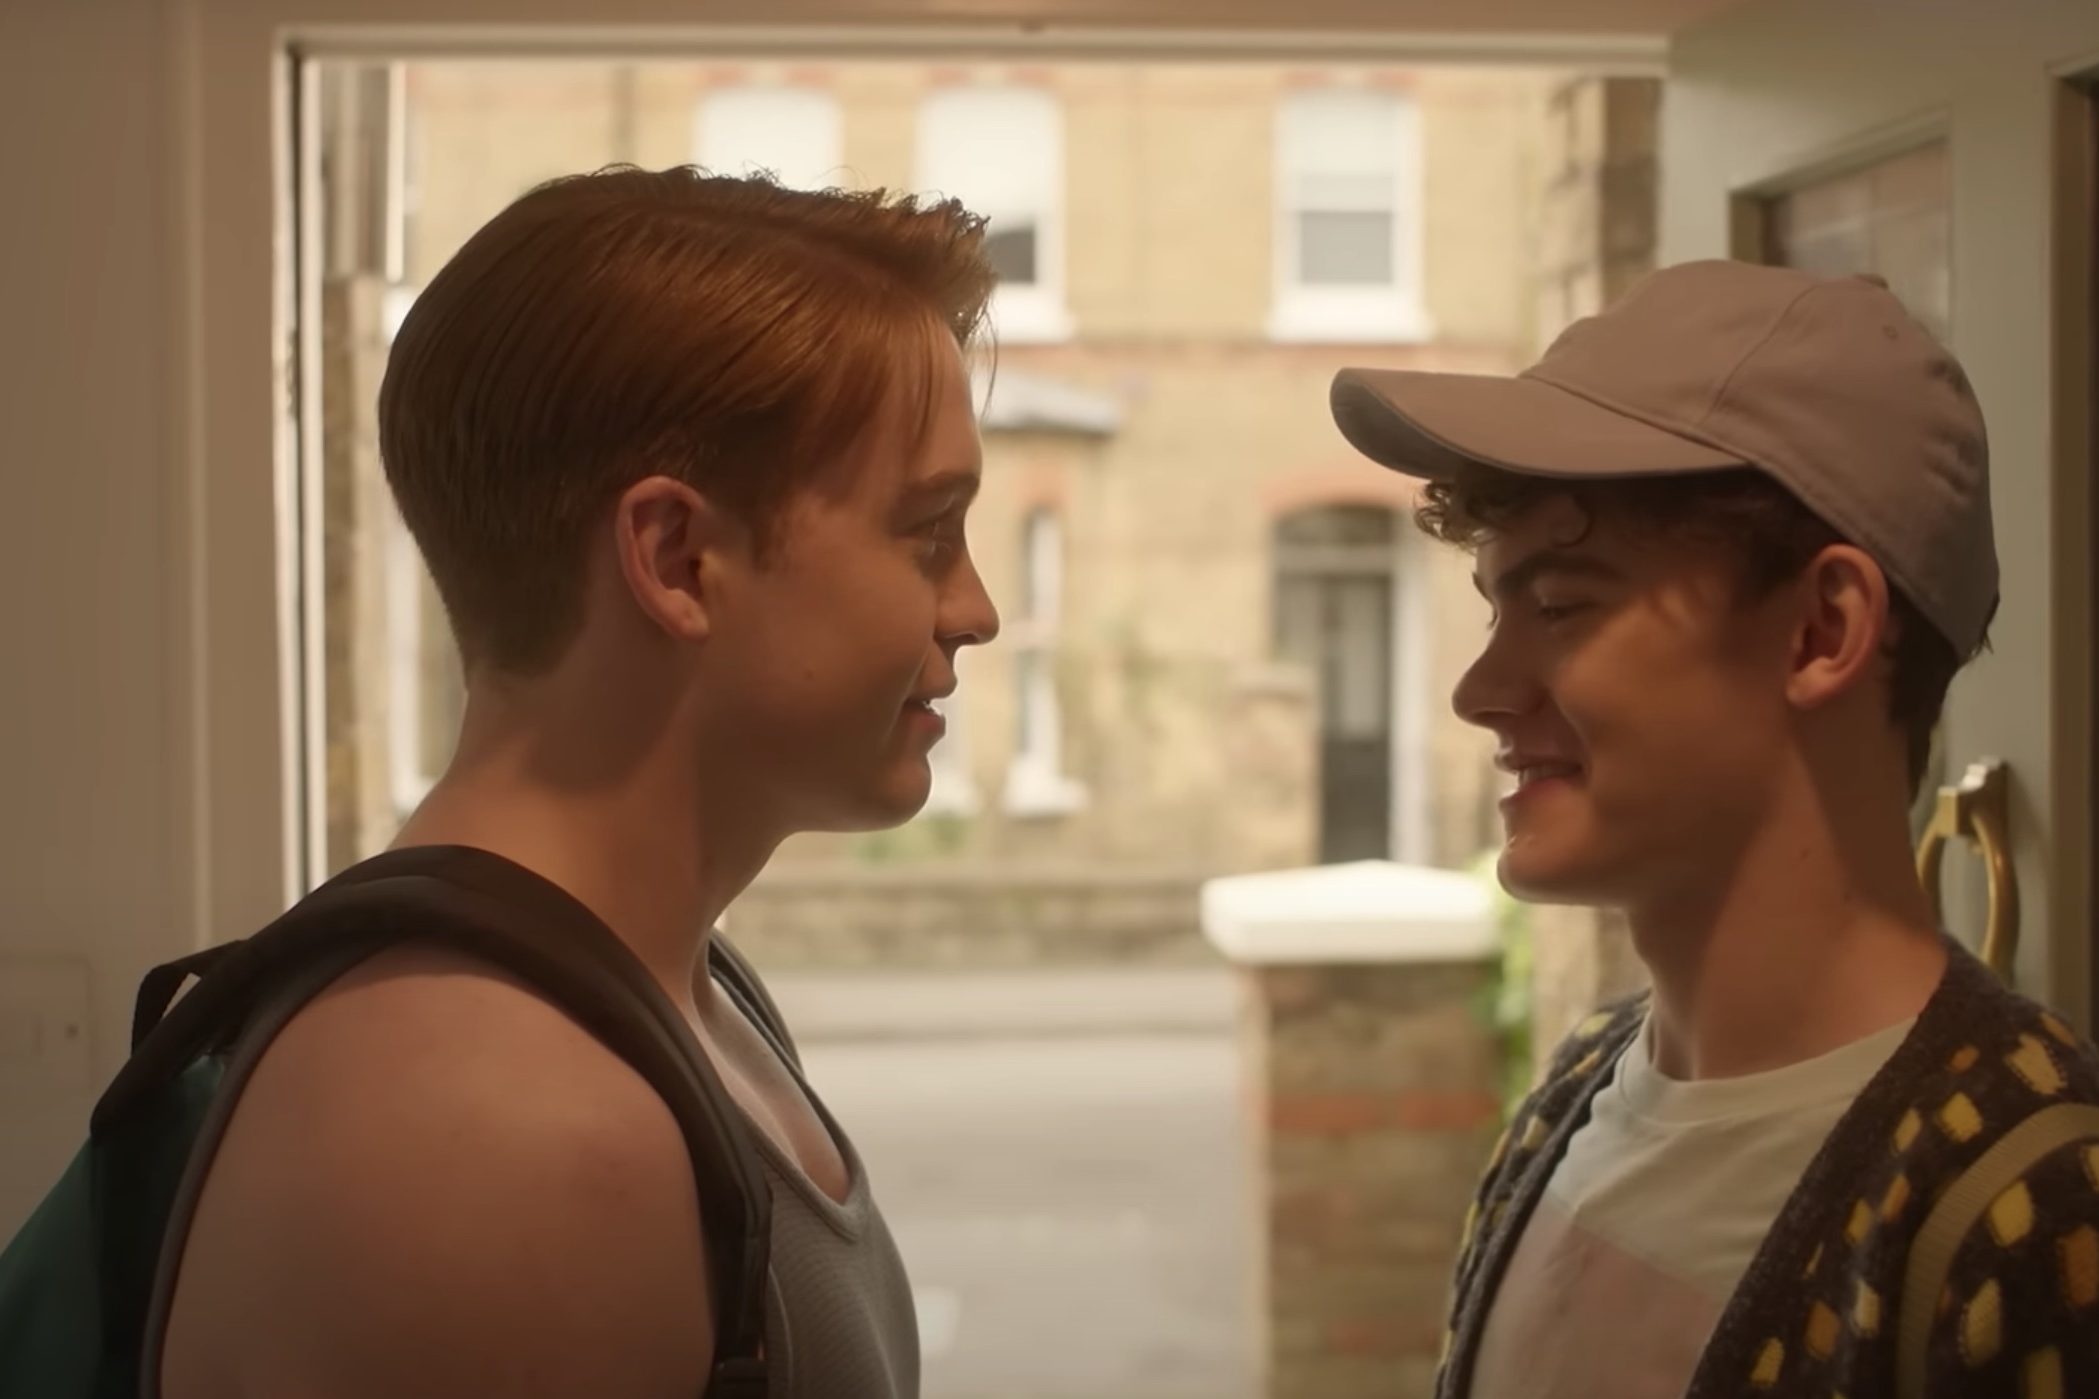 Two boys stare at each other in the front of a house.